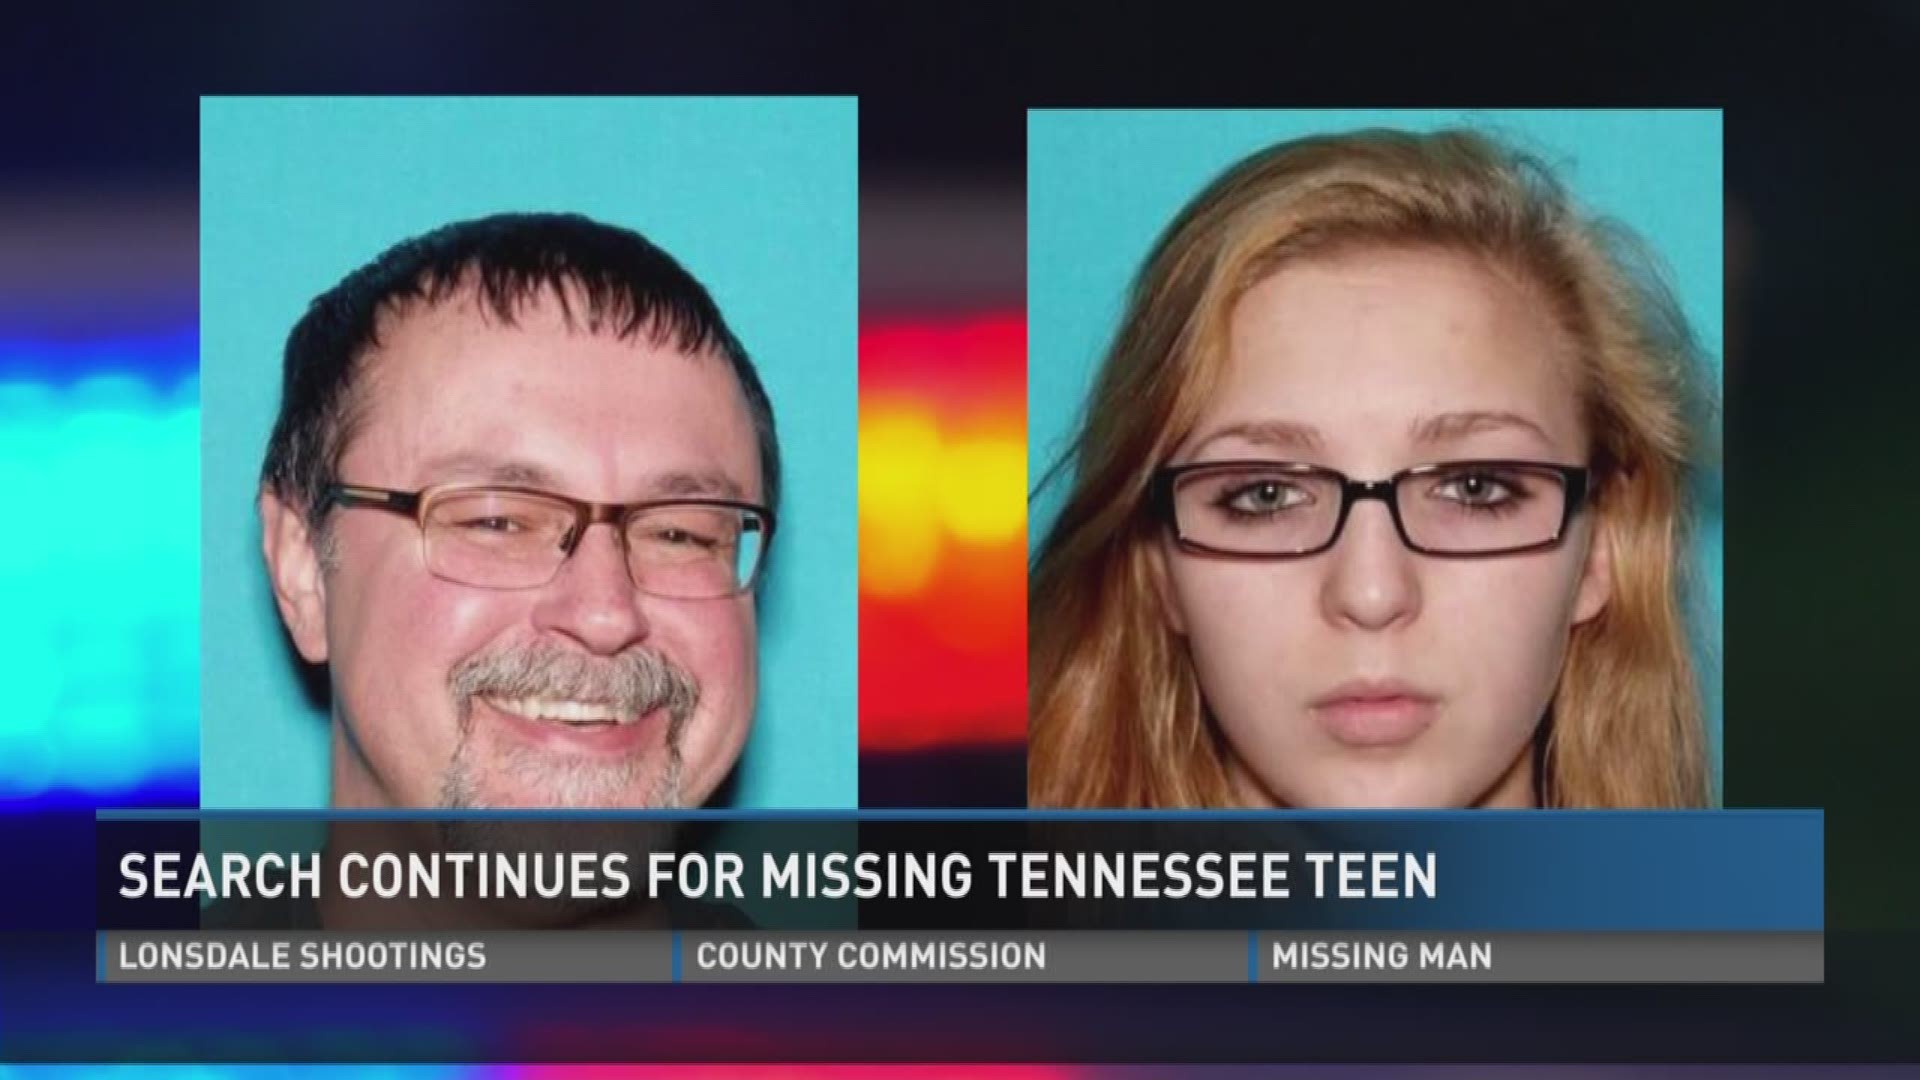 There have been 1,100 tips but no confirmed sightings of 15-year-old Elizabeth Thomas and 50-year-old Tad Cummins since their disappearance from Middle Tennessee.